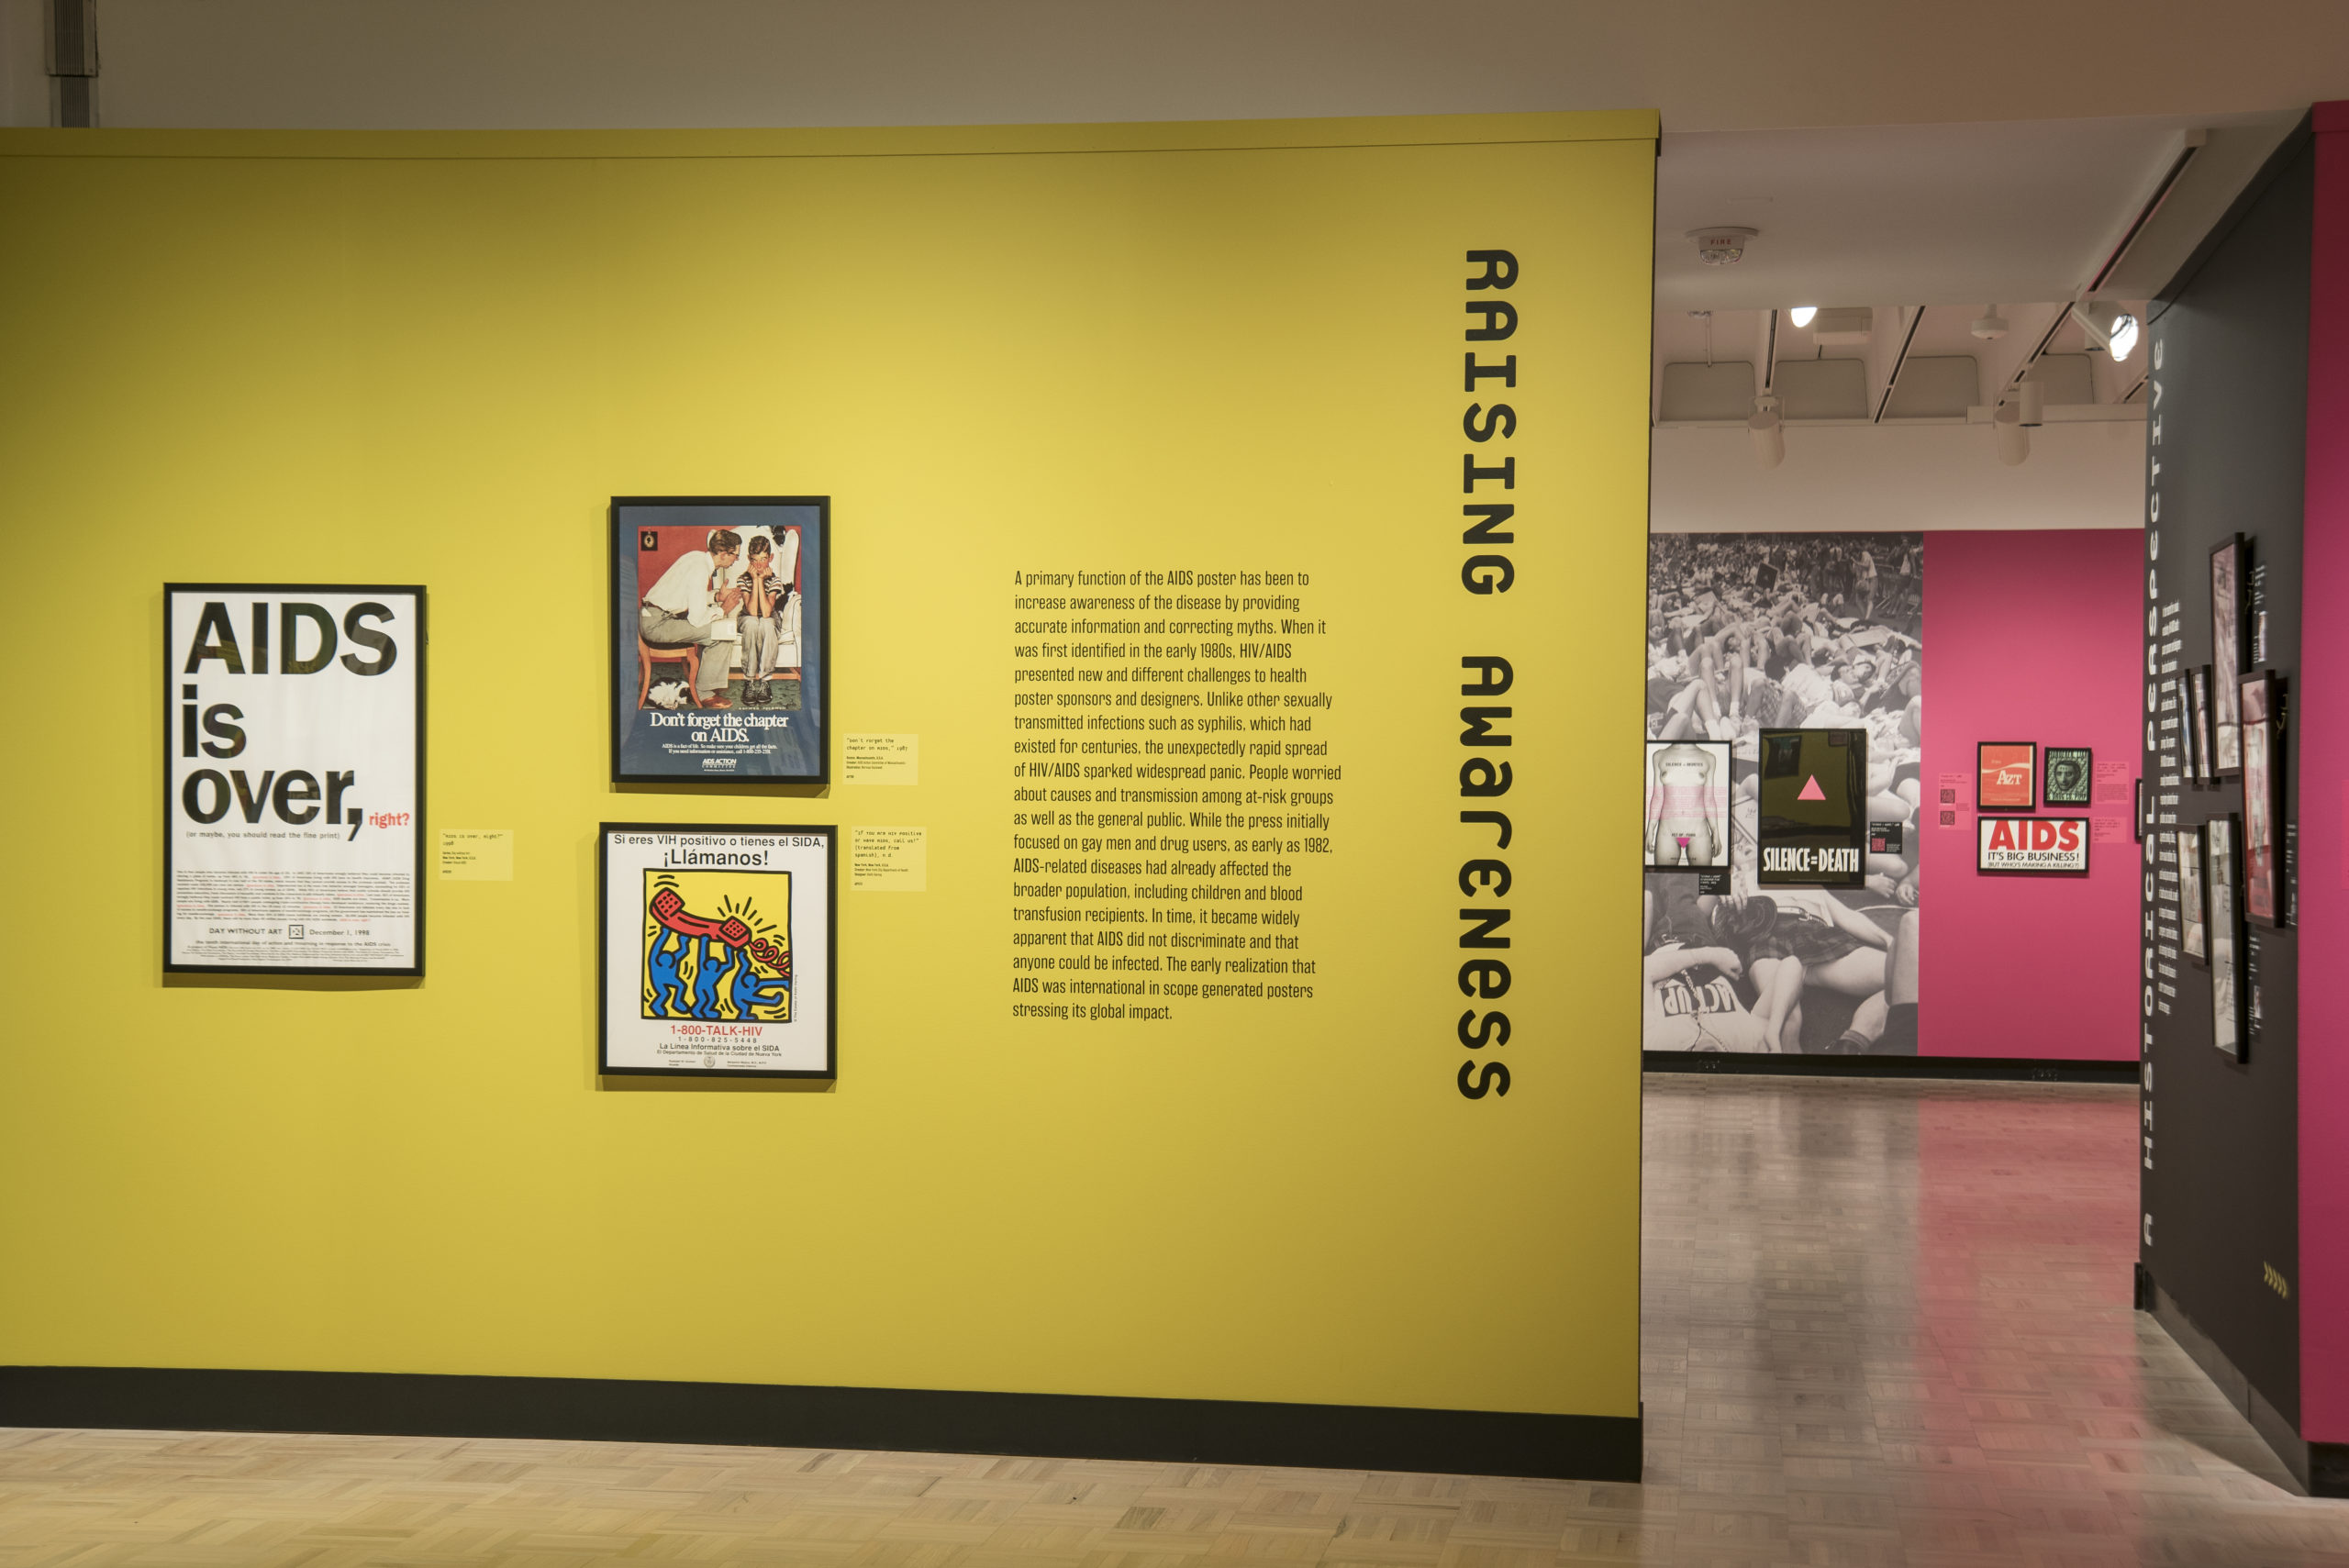 Up Against the Wall: Art, Activism, and the AIDS Poster